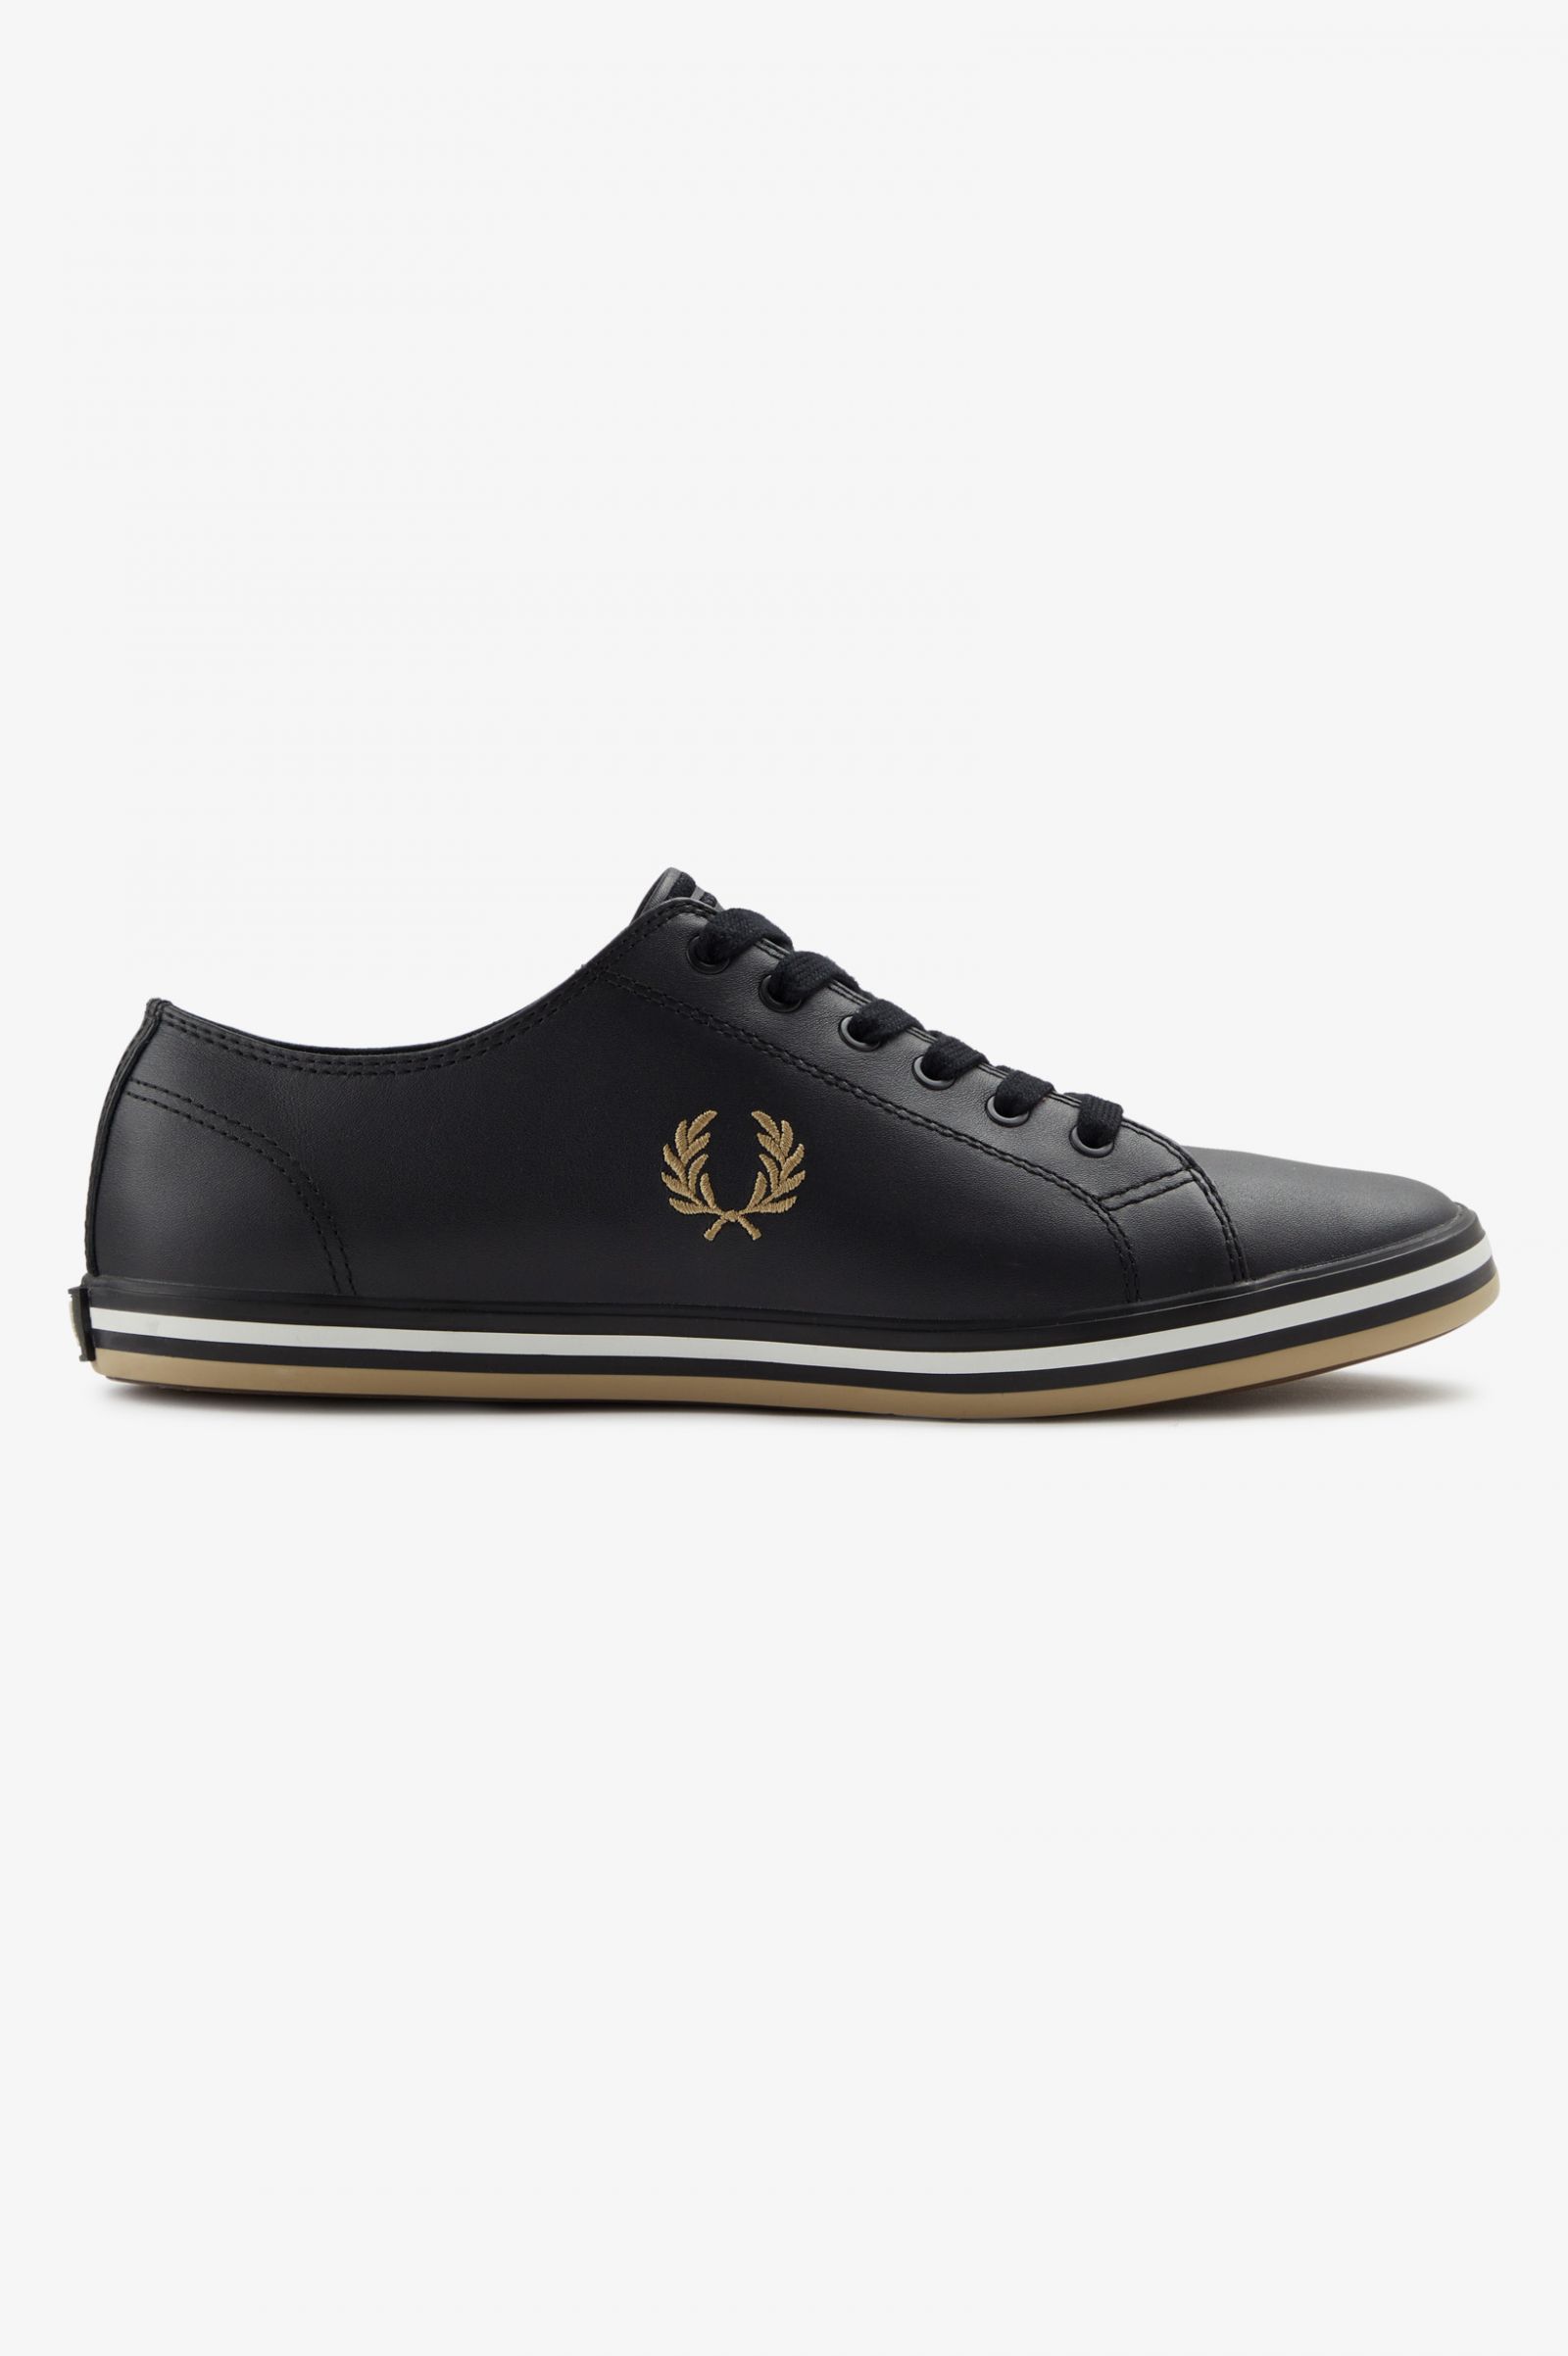 fred-perry-fred-perry-kingston-leather-b4333-black-40